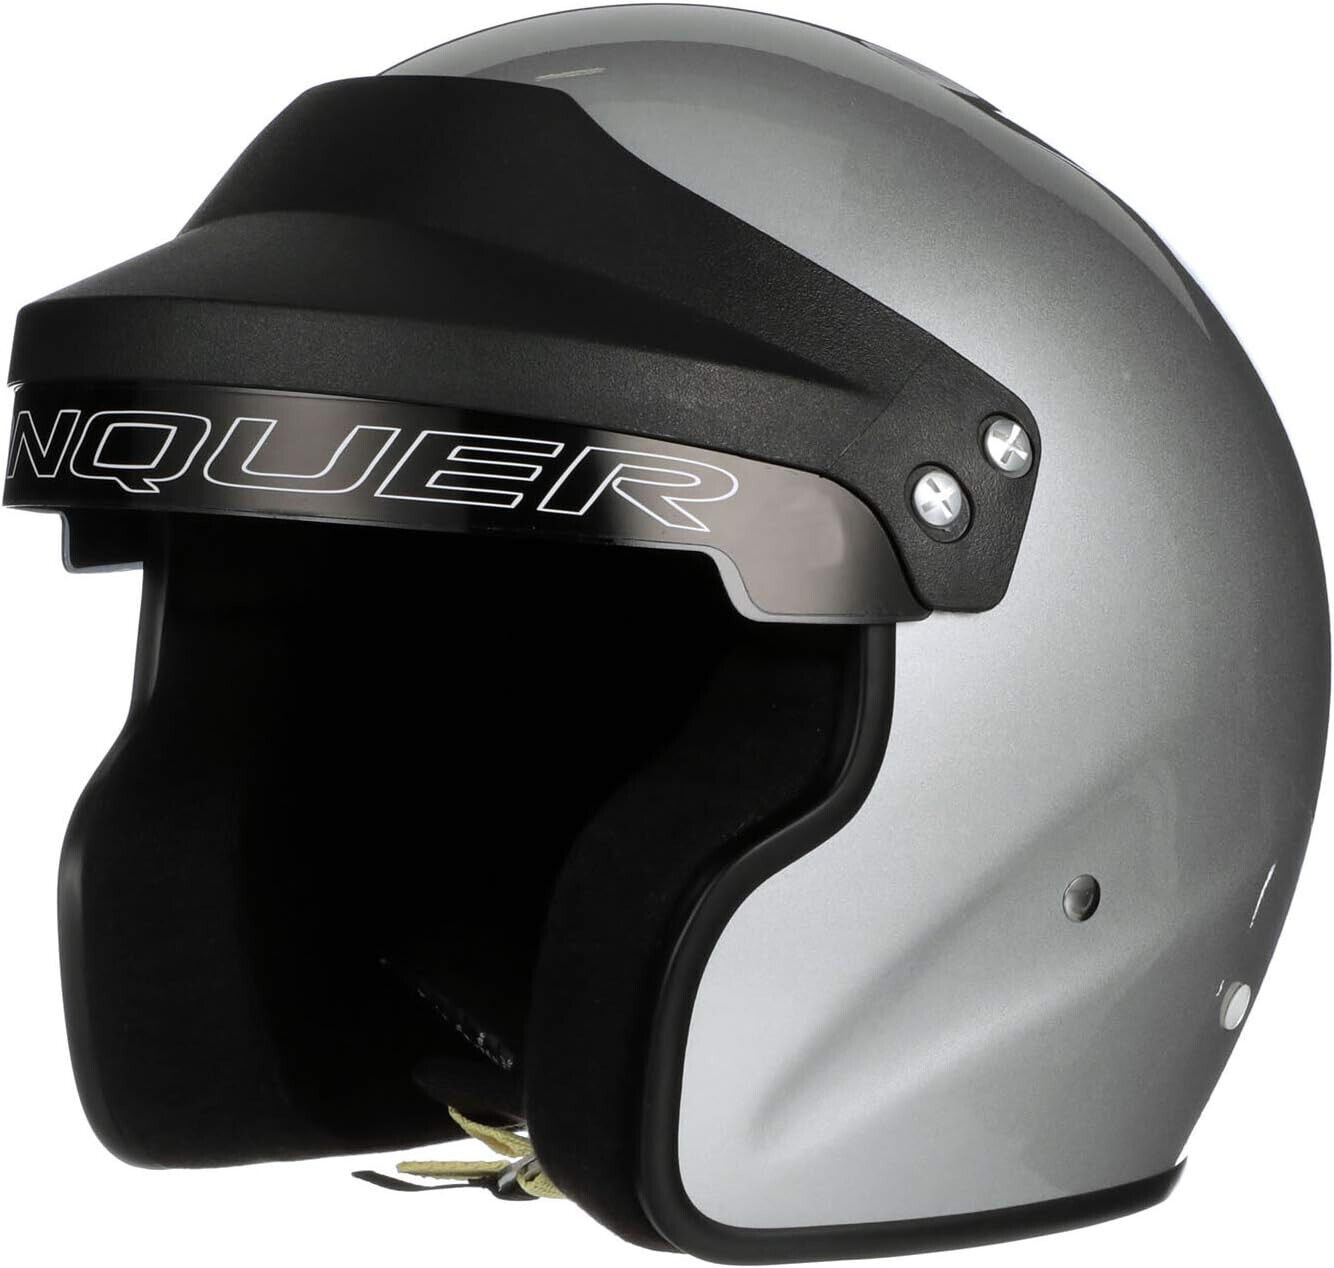 🔥 Conquer Snell SA2020 Approved Open Face Auto Racing Helmet - Small - Silver